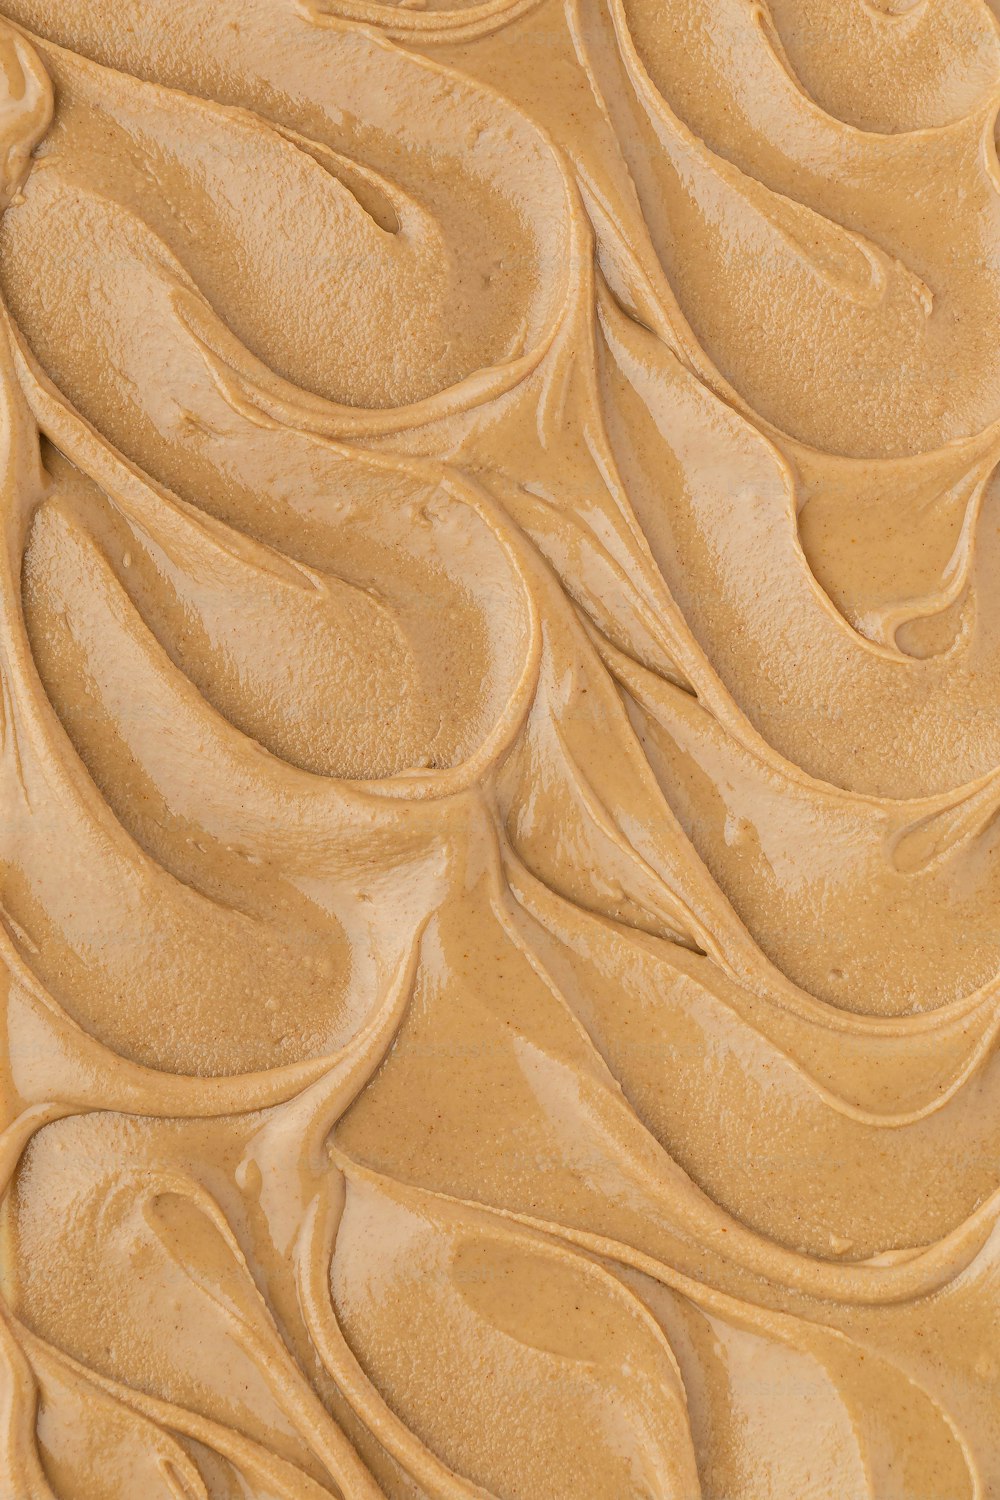 a close up of peanut butter on a plate